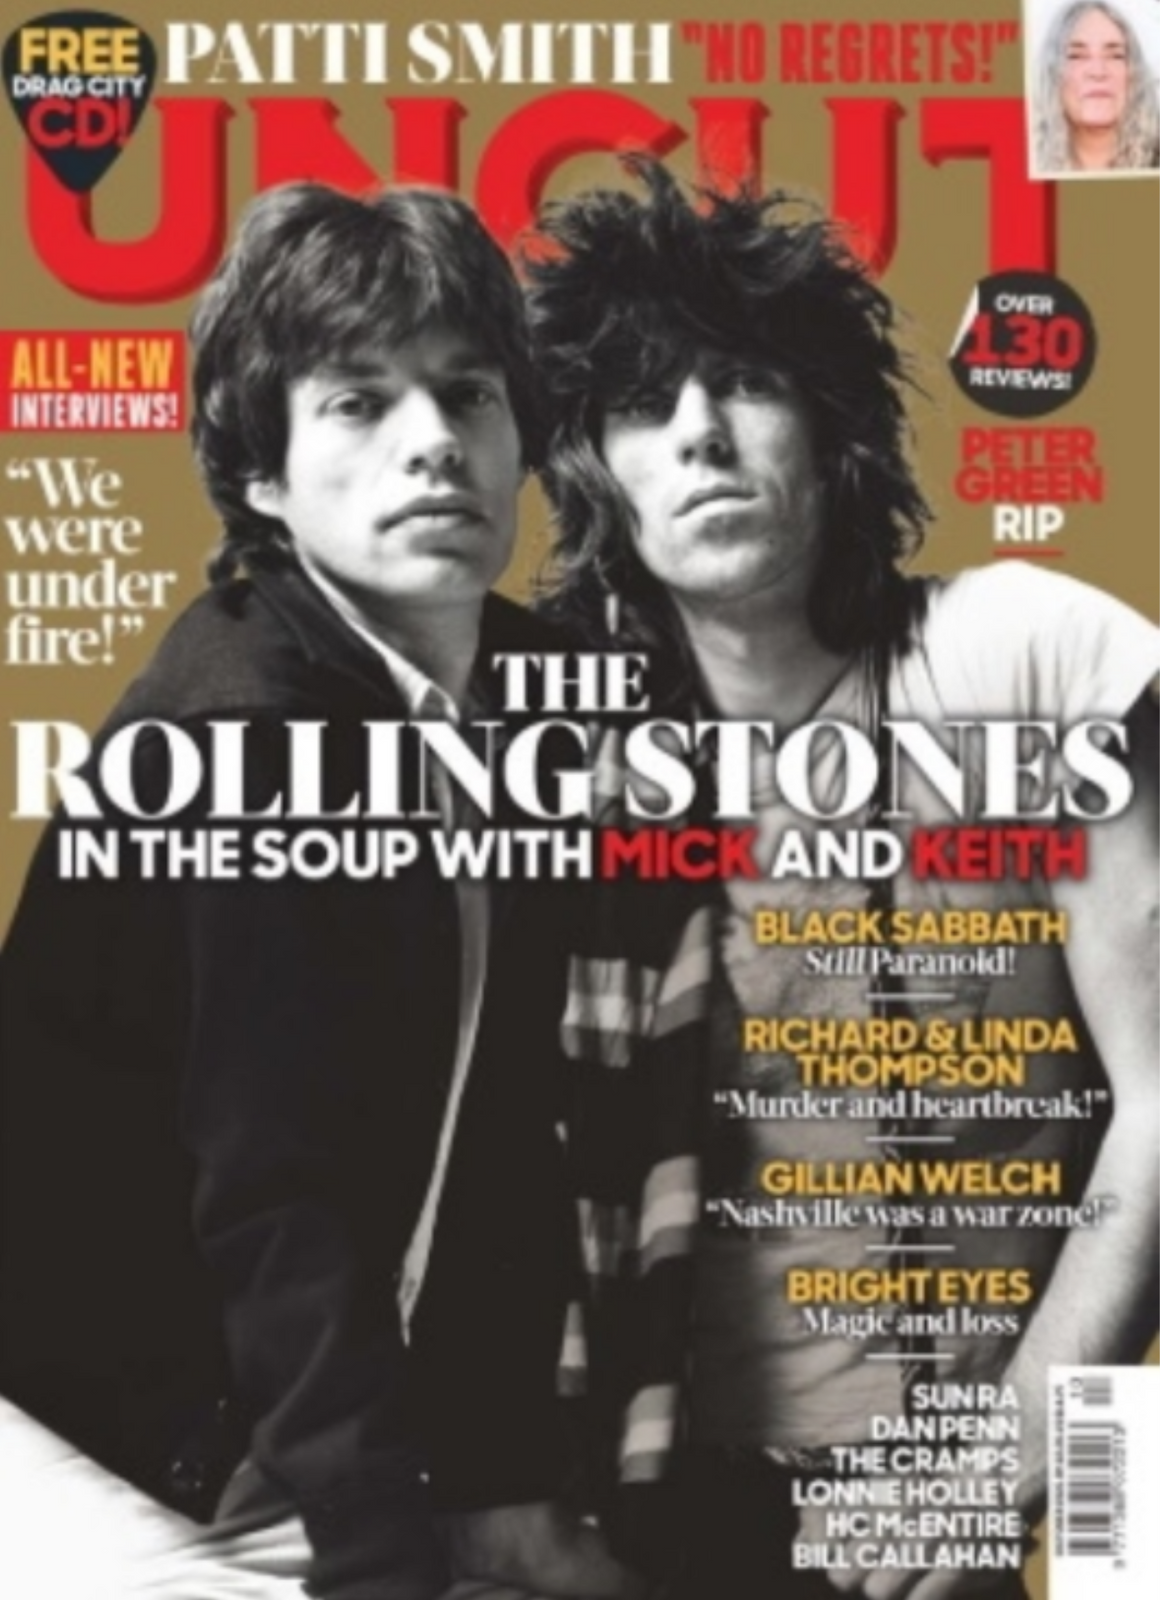 The Rolling Stones Mick Jagger Keith Richards Uncut Magazine October 2020 & Free CD